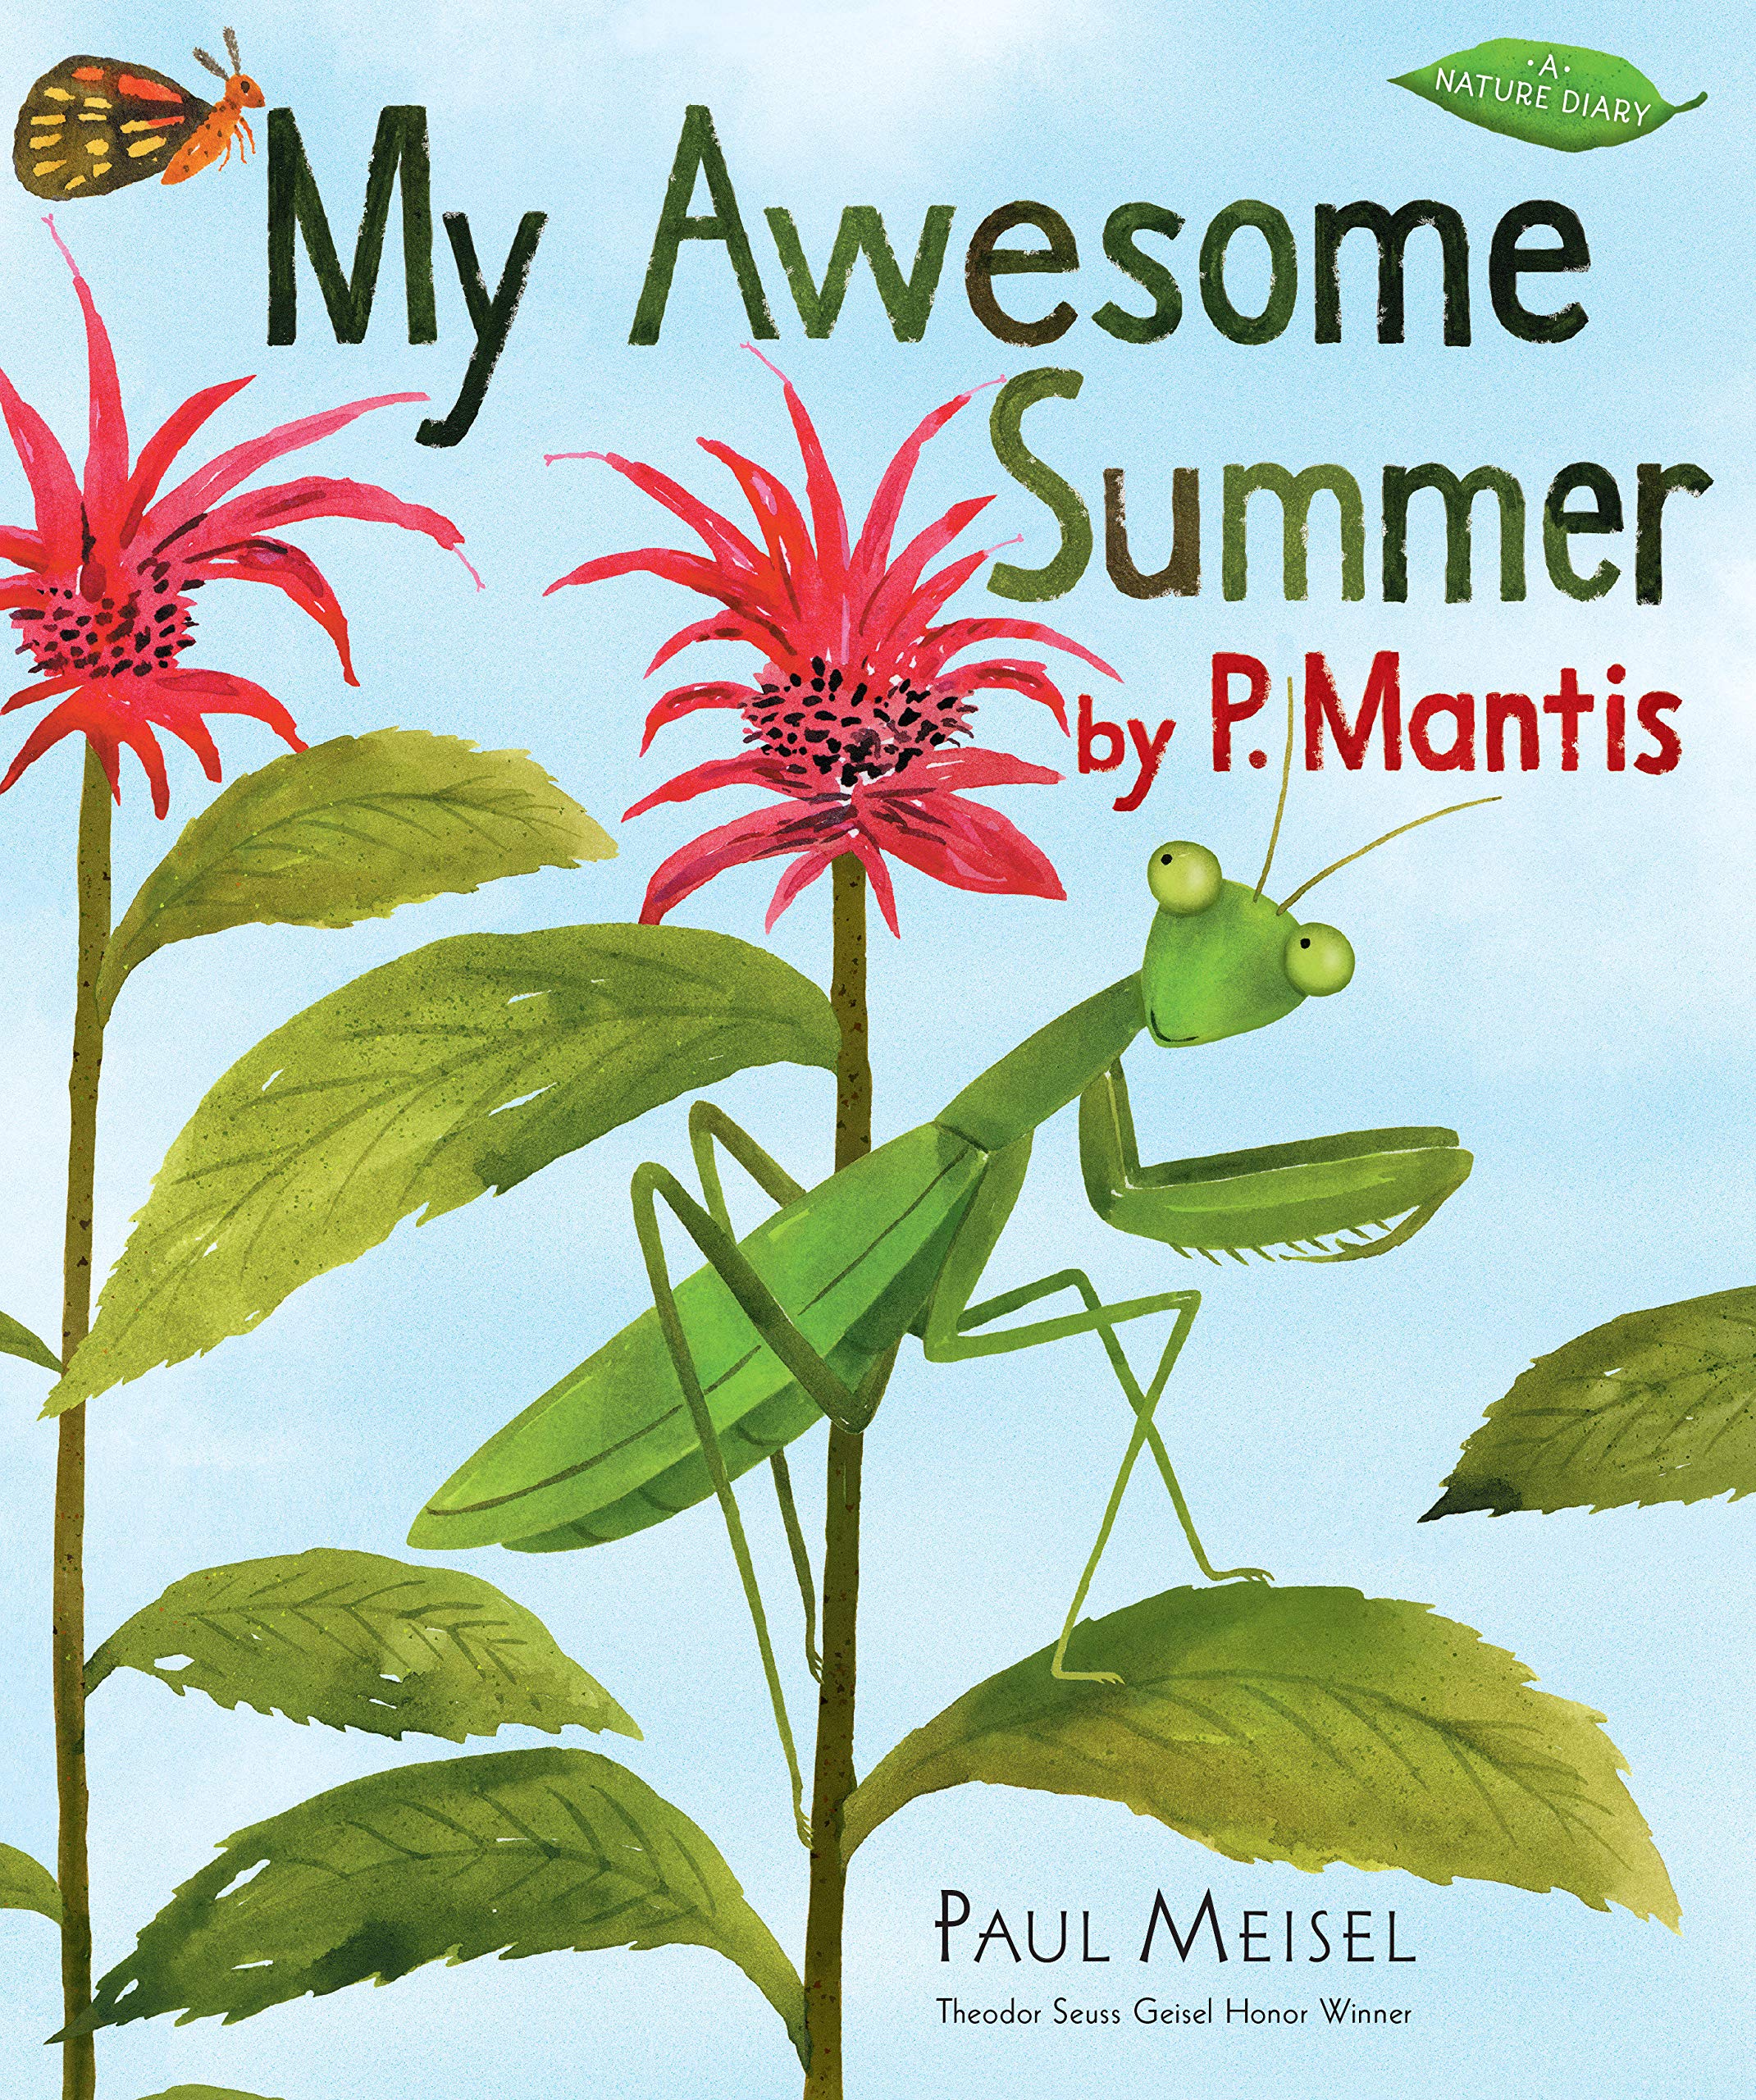 speech and language teaching concepts for My Awesome Summer by P. Mantis in speech therapy